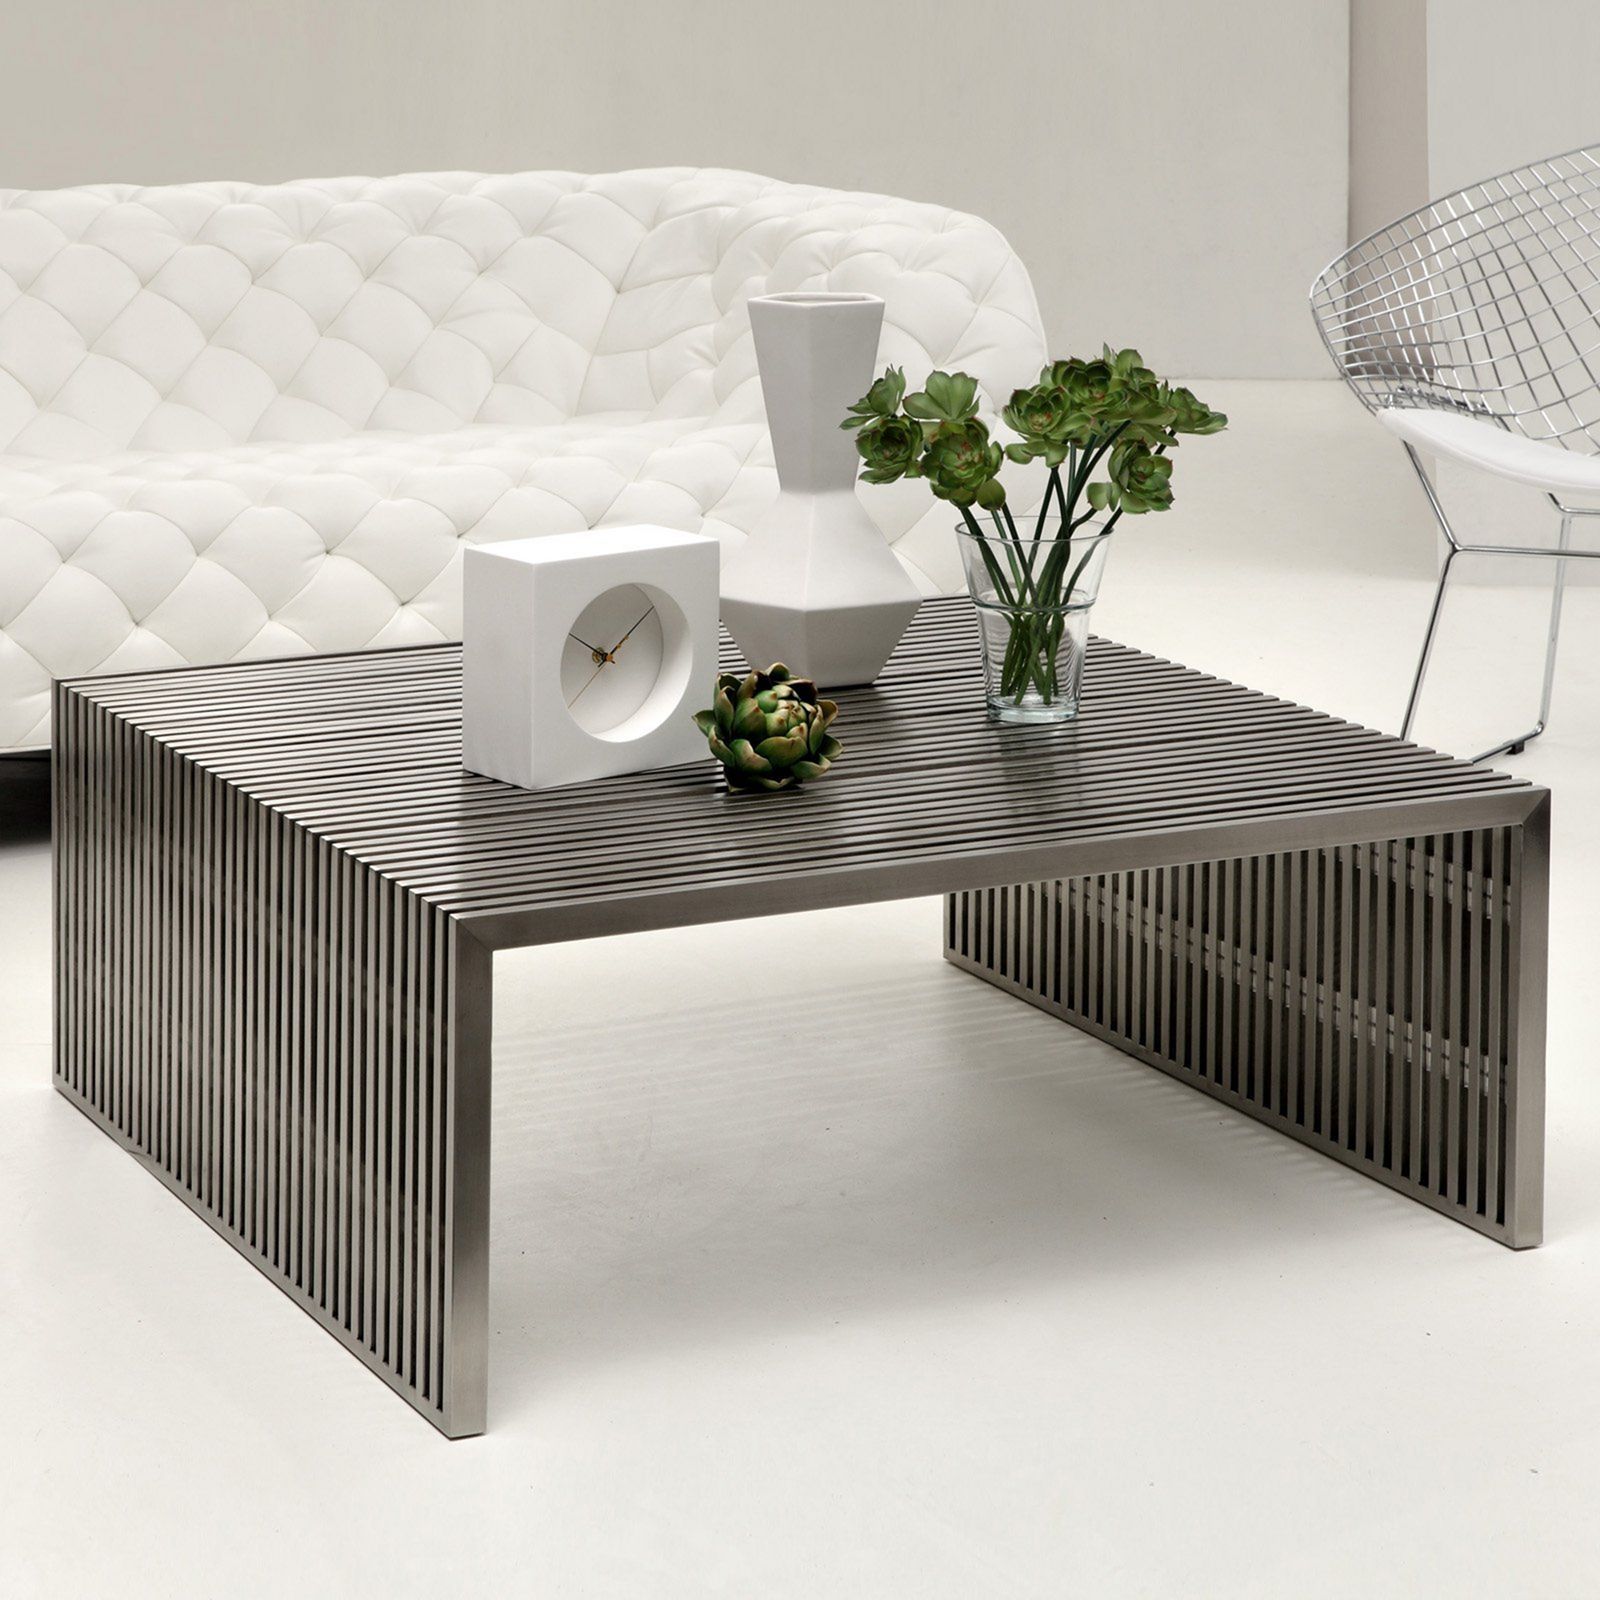 Stainless Steel Coffee Tables – Ideas On Foter With Regard To Brushed Stainless Steel Coffee Tables (View 12 of 20)